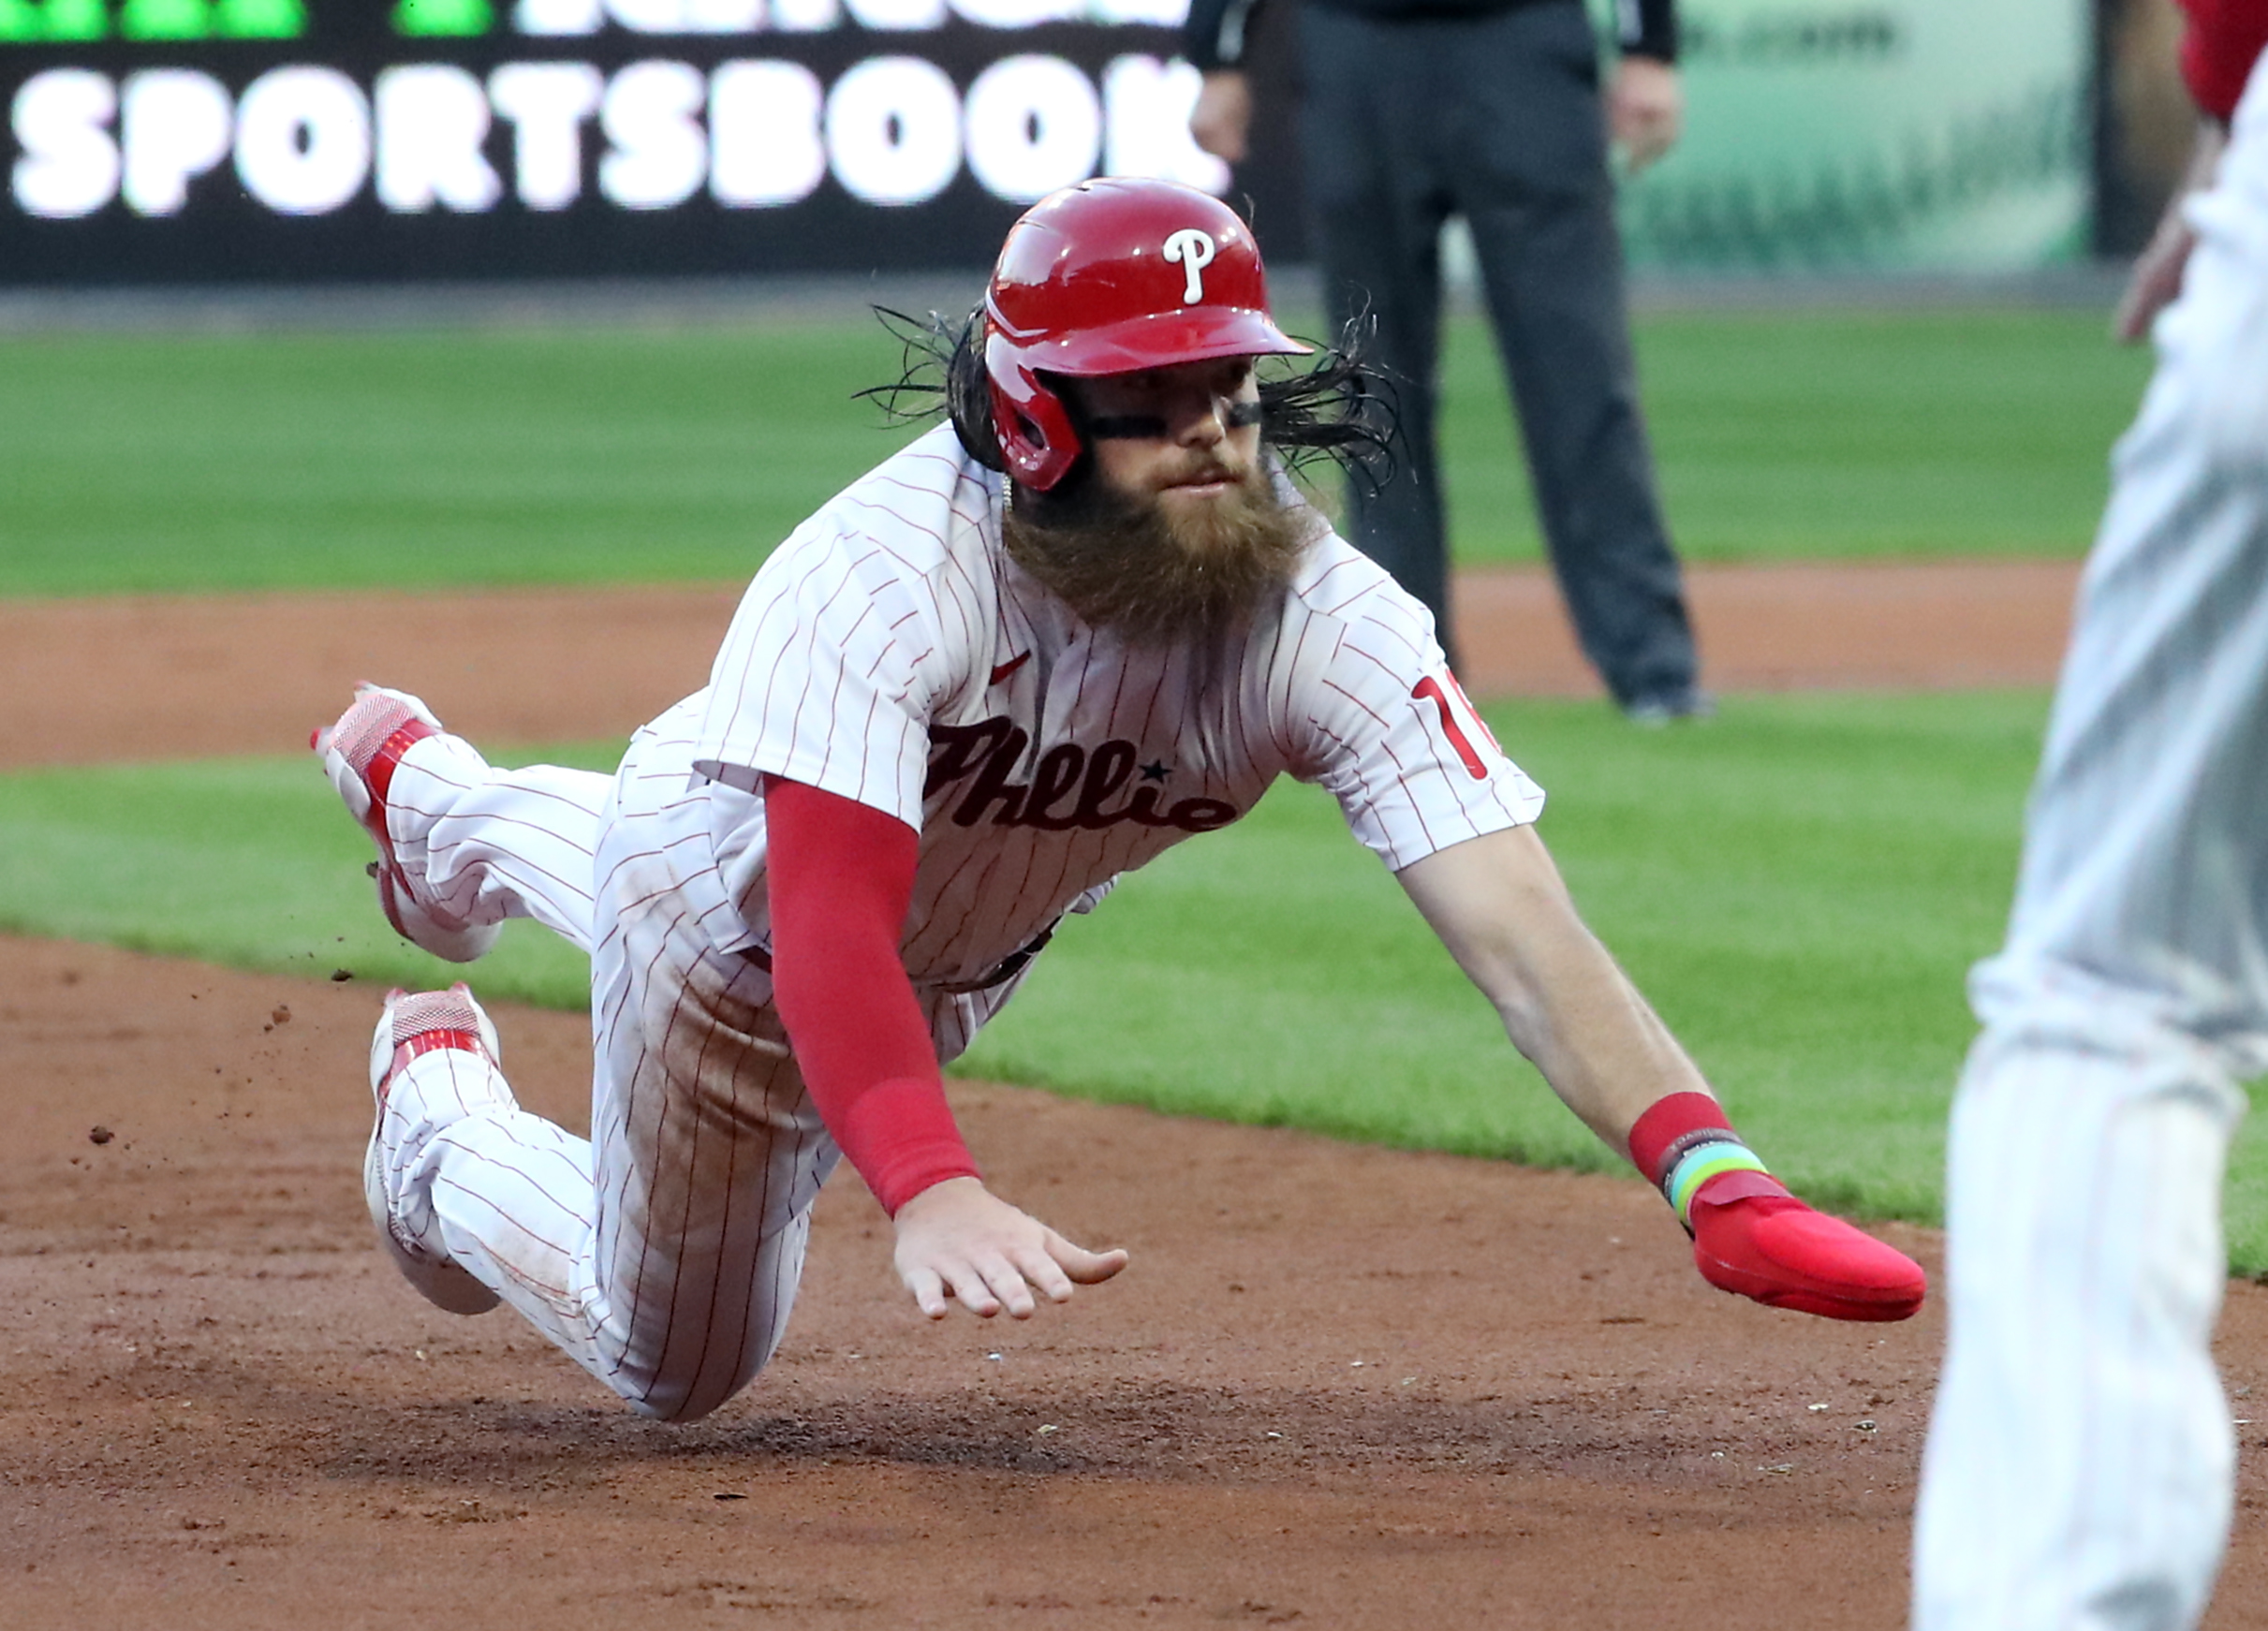 2022 MLB Playoffs: Phillies advance to NLCS with emphatic Game 4 win vs.  Braves